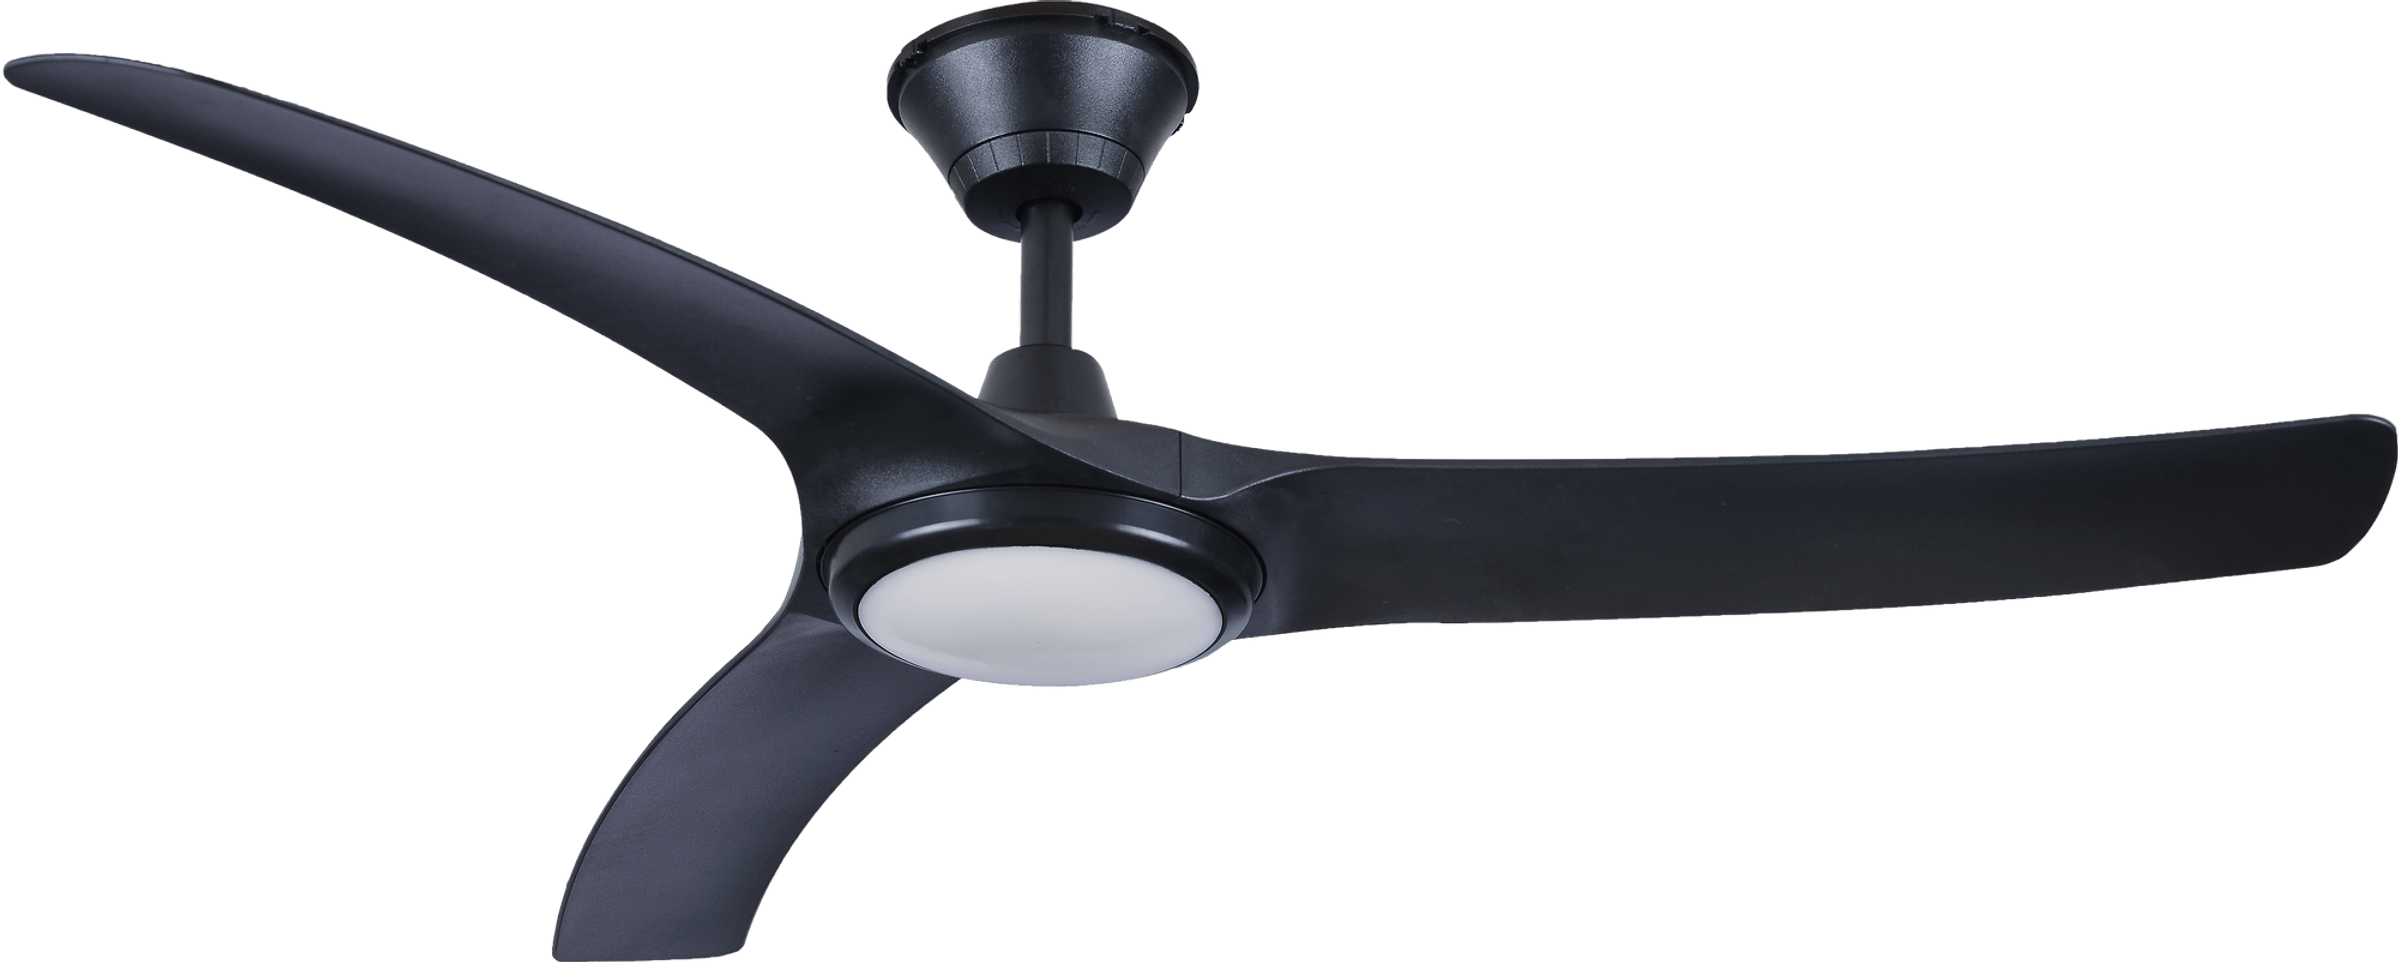 Hunter Pacific Ceiling Fans Black / Yes / 52 Inch Hunter Pacific Aqua DC Waterproof Ceiling Fan by Hunter Pacific Lights-For-You AIP668